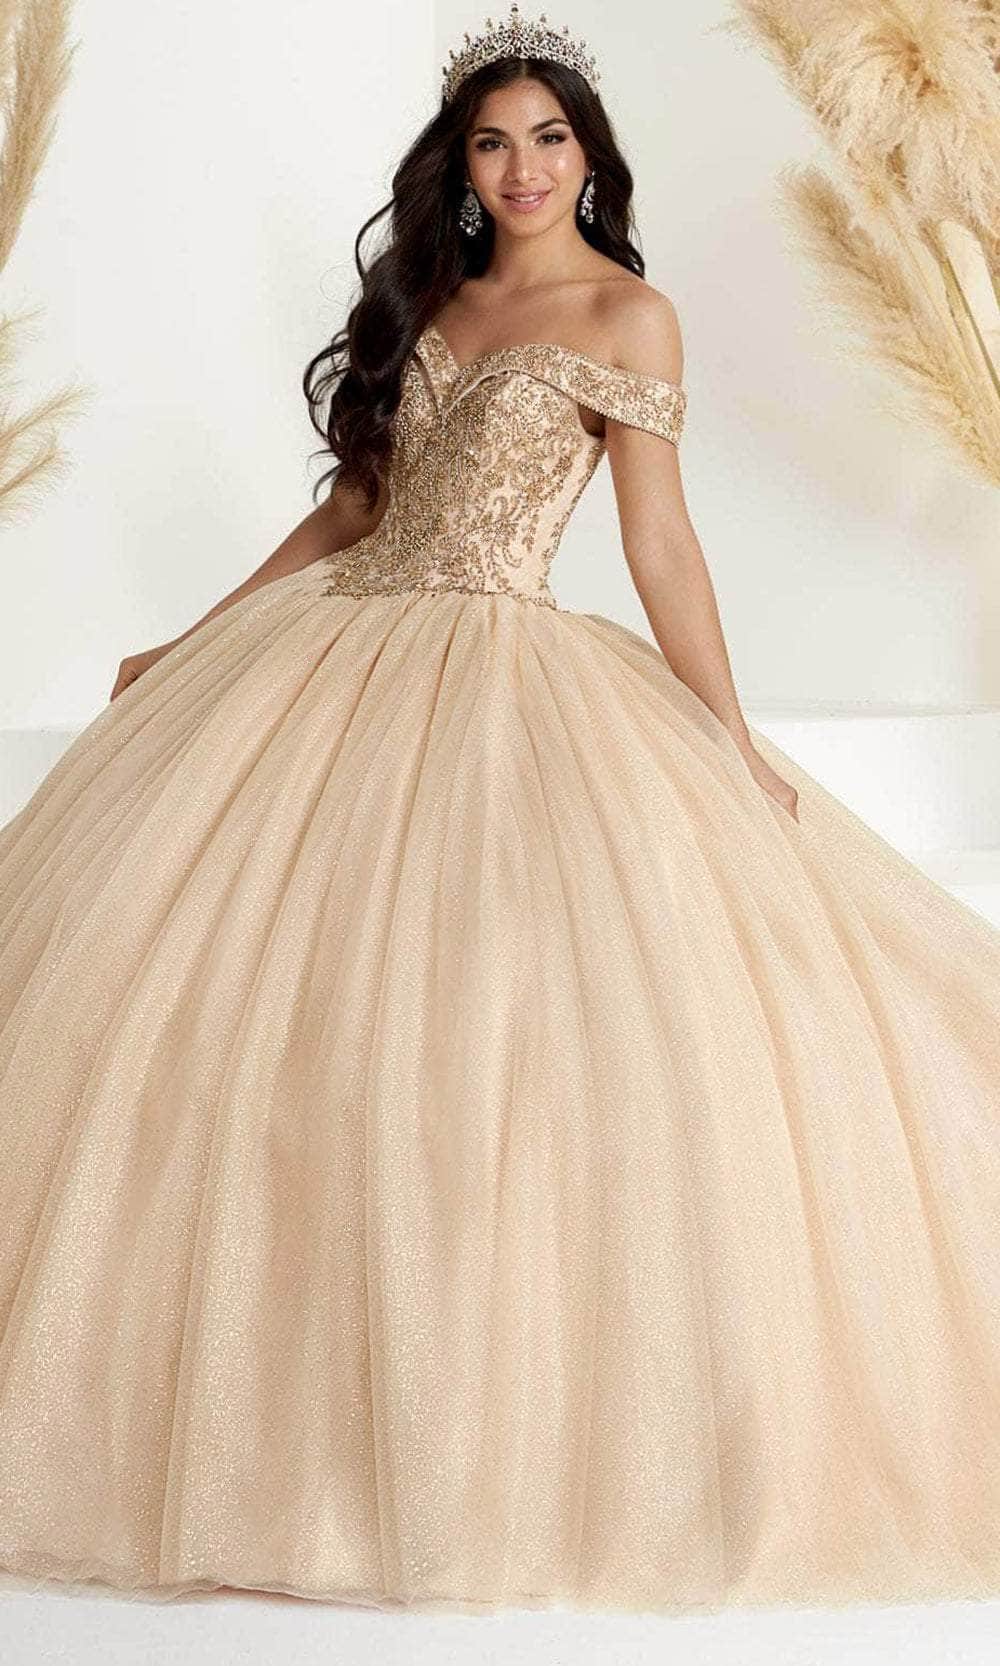 Fiesta Gowns 56446 - Shimmering Off-shoulder Ballgown Special Occasion Dress 0 / Champagne/Gold